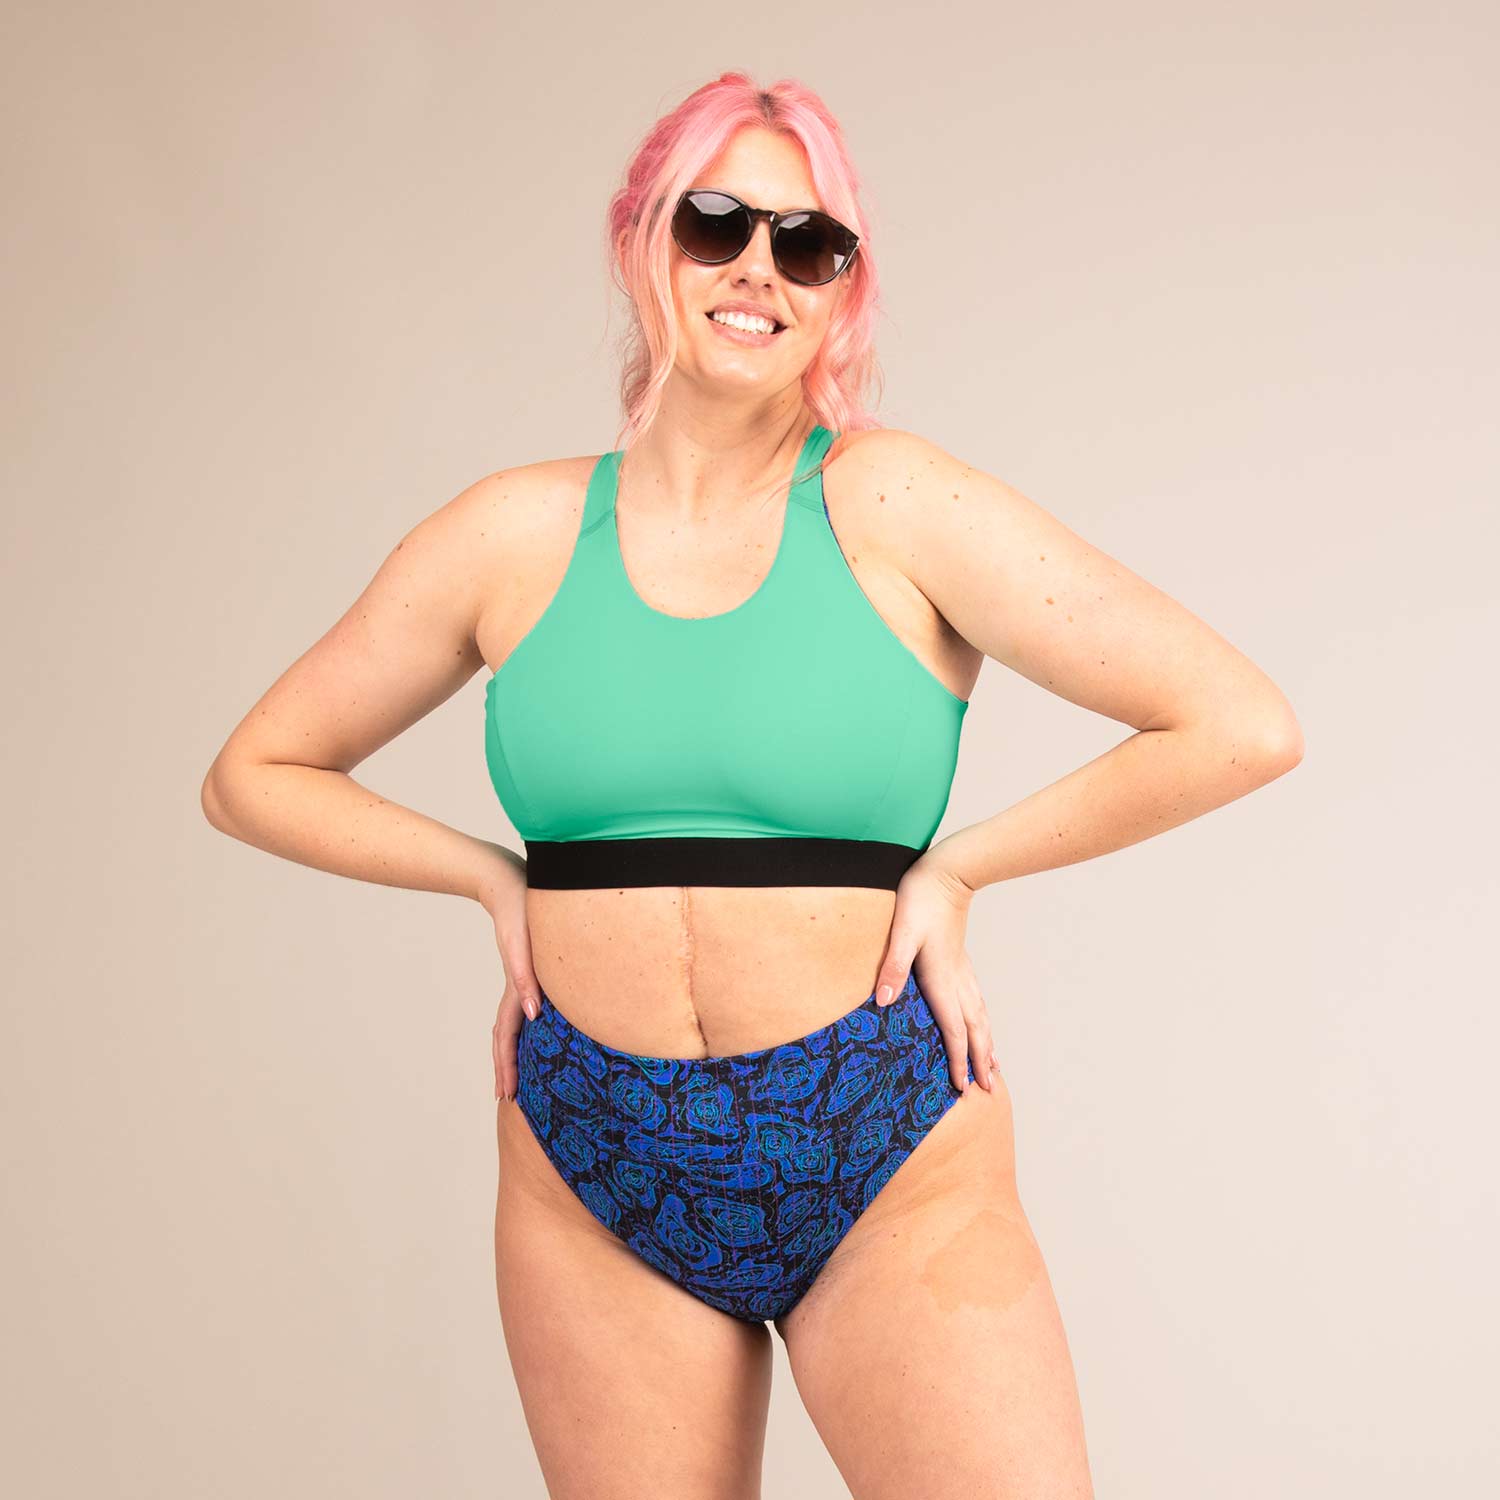 EQUINOX GEO JAGUAR | Reversible Recycled Sports Bra | 3RD ROCK Clothing -  Sophie is a 34G with a 32" underbust, 40.5" overbust and wears a size 16 F